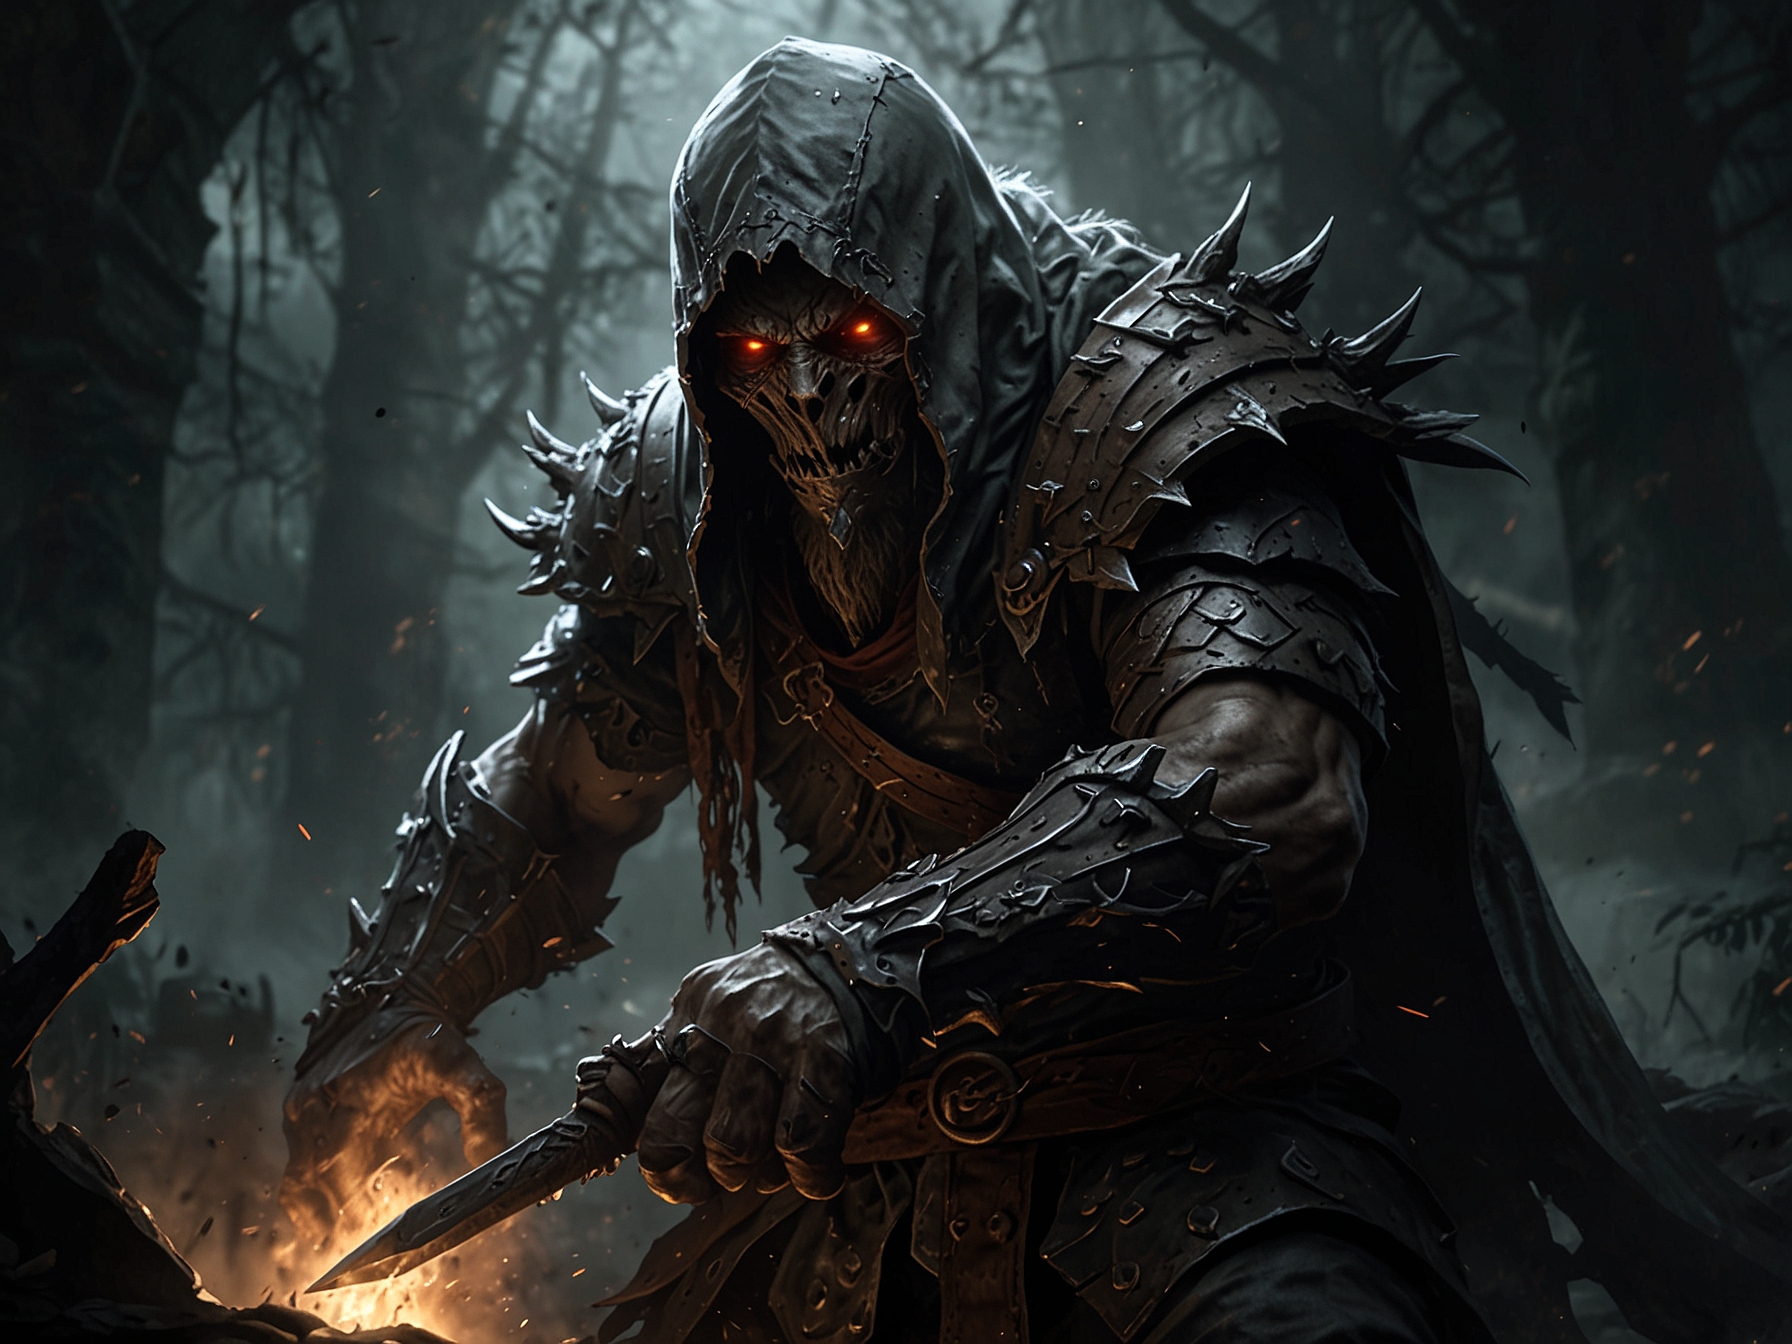 A frustrated player faces one of Elden Ring: Shadow of the Erdtree’s notoriously difficult bosses. The image conveys the intense and challenging nature of the new enemies that have polarized the community.